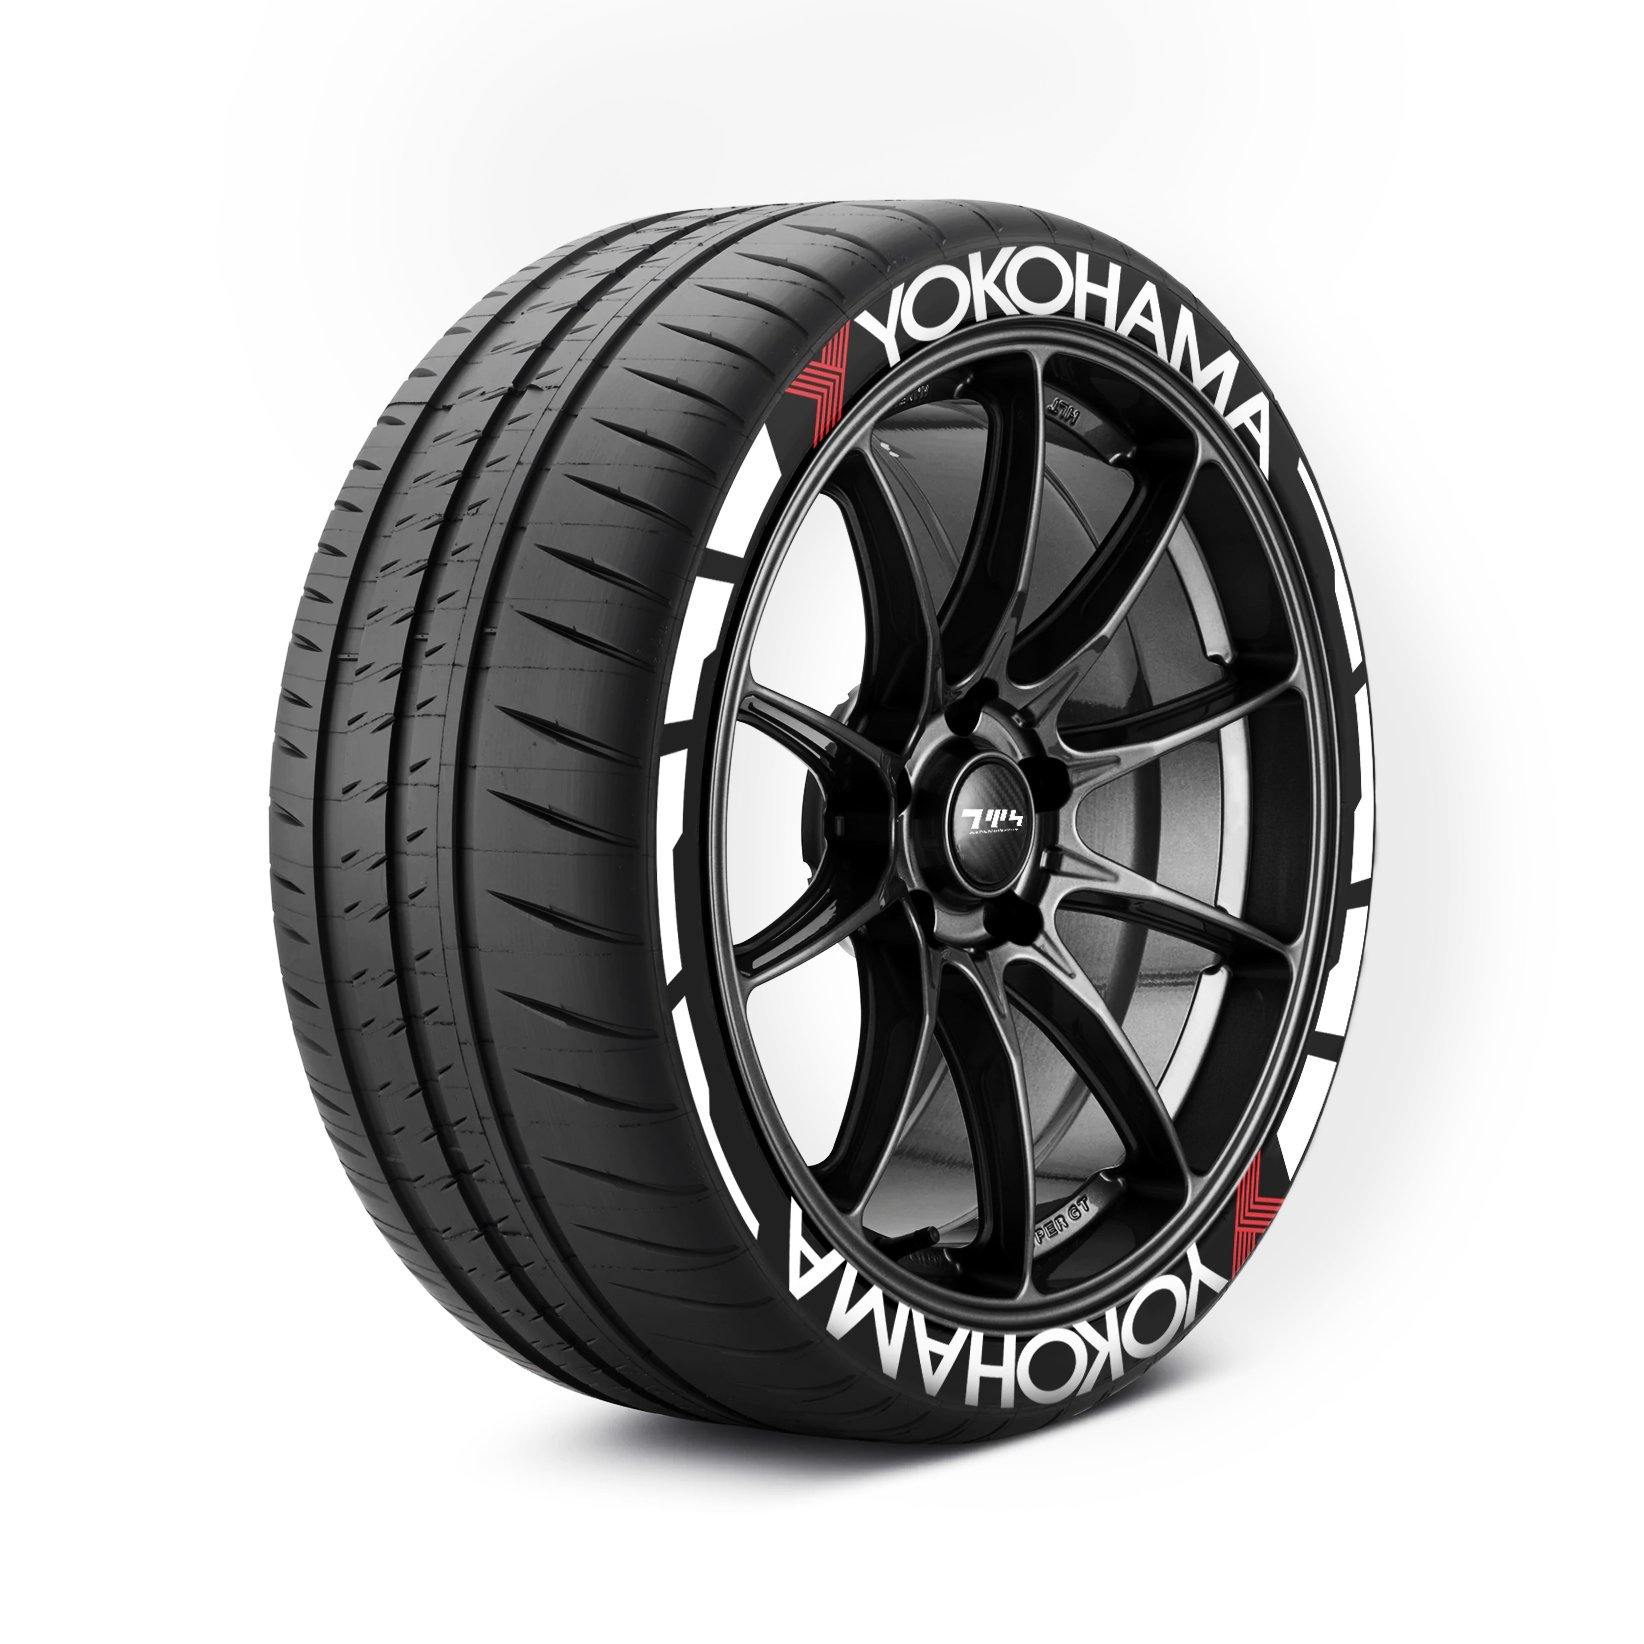 YOKOHAMA Tyre Stickers With Flares - Tyre Wall Stickers